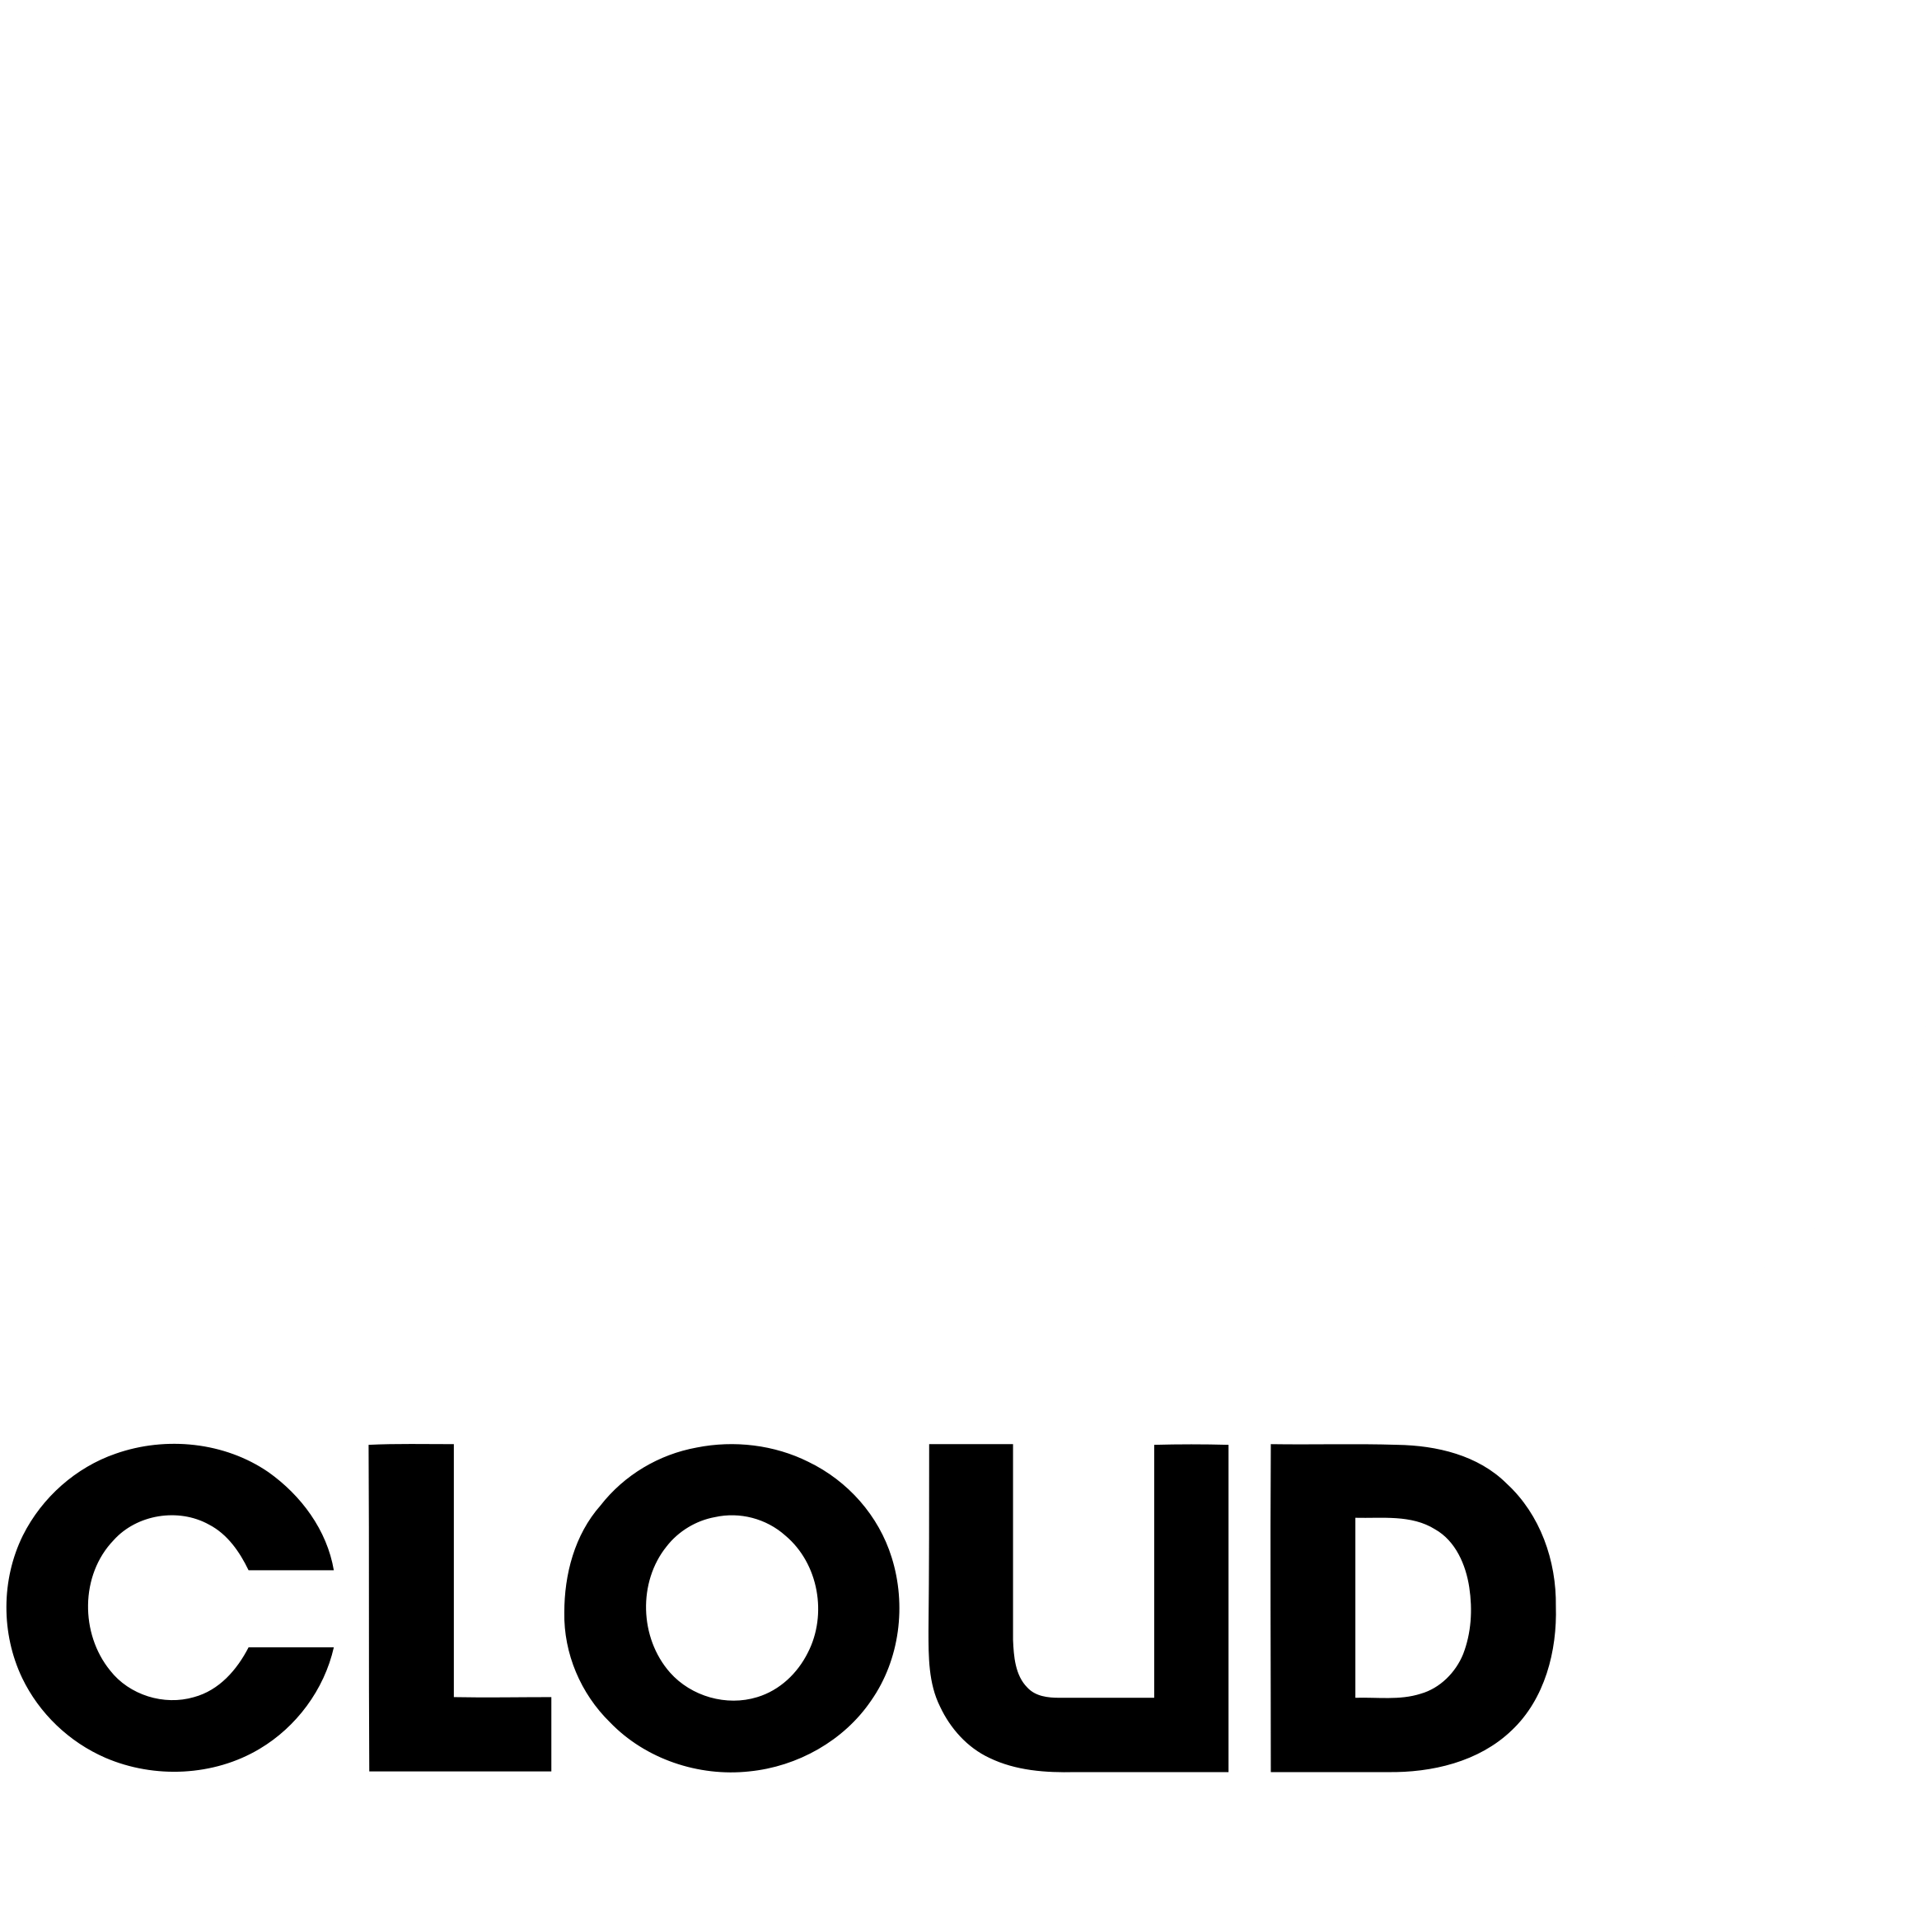 Download Cloud 9 Logo Black And White.